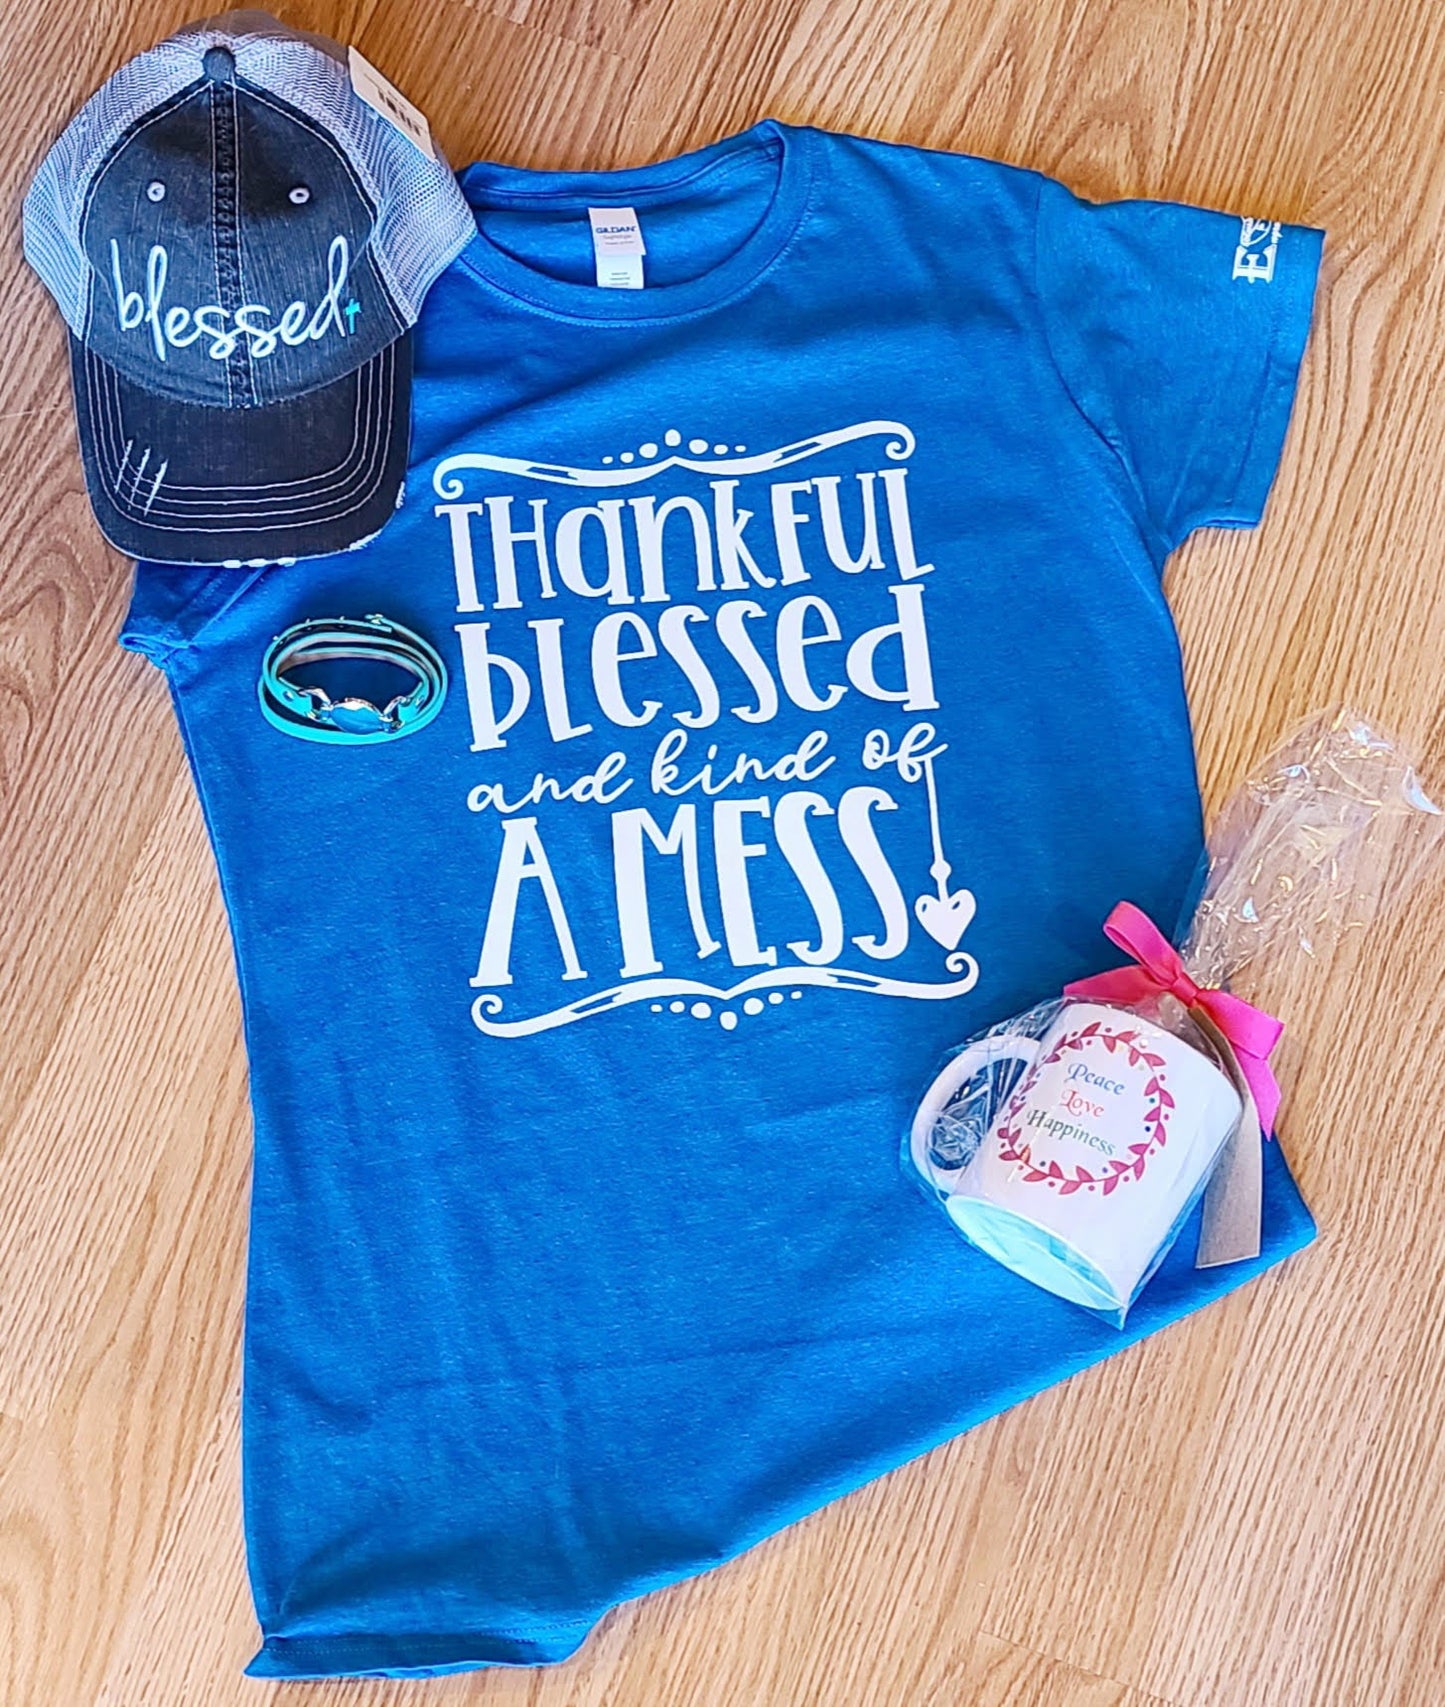 Thankful Blessed and Kind of a Mess Tshirt